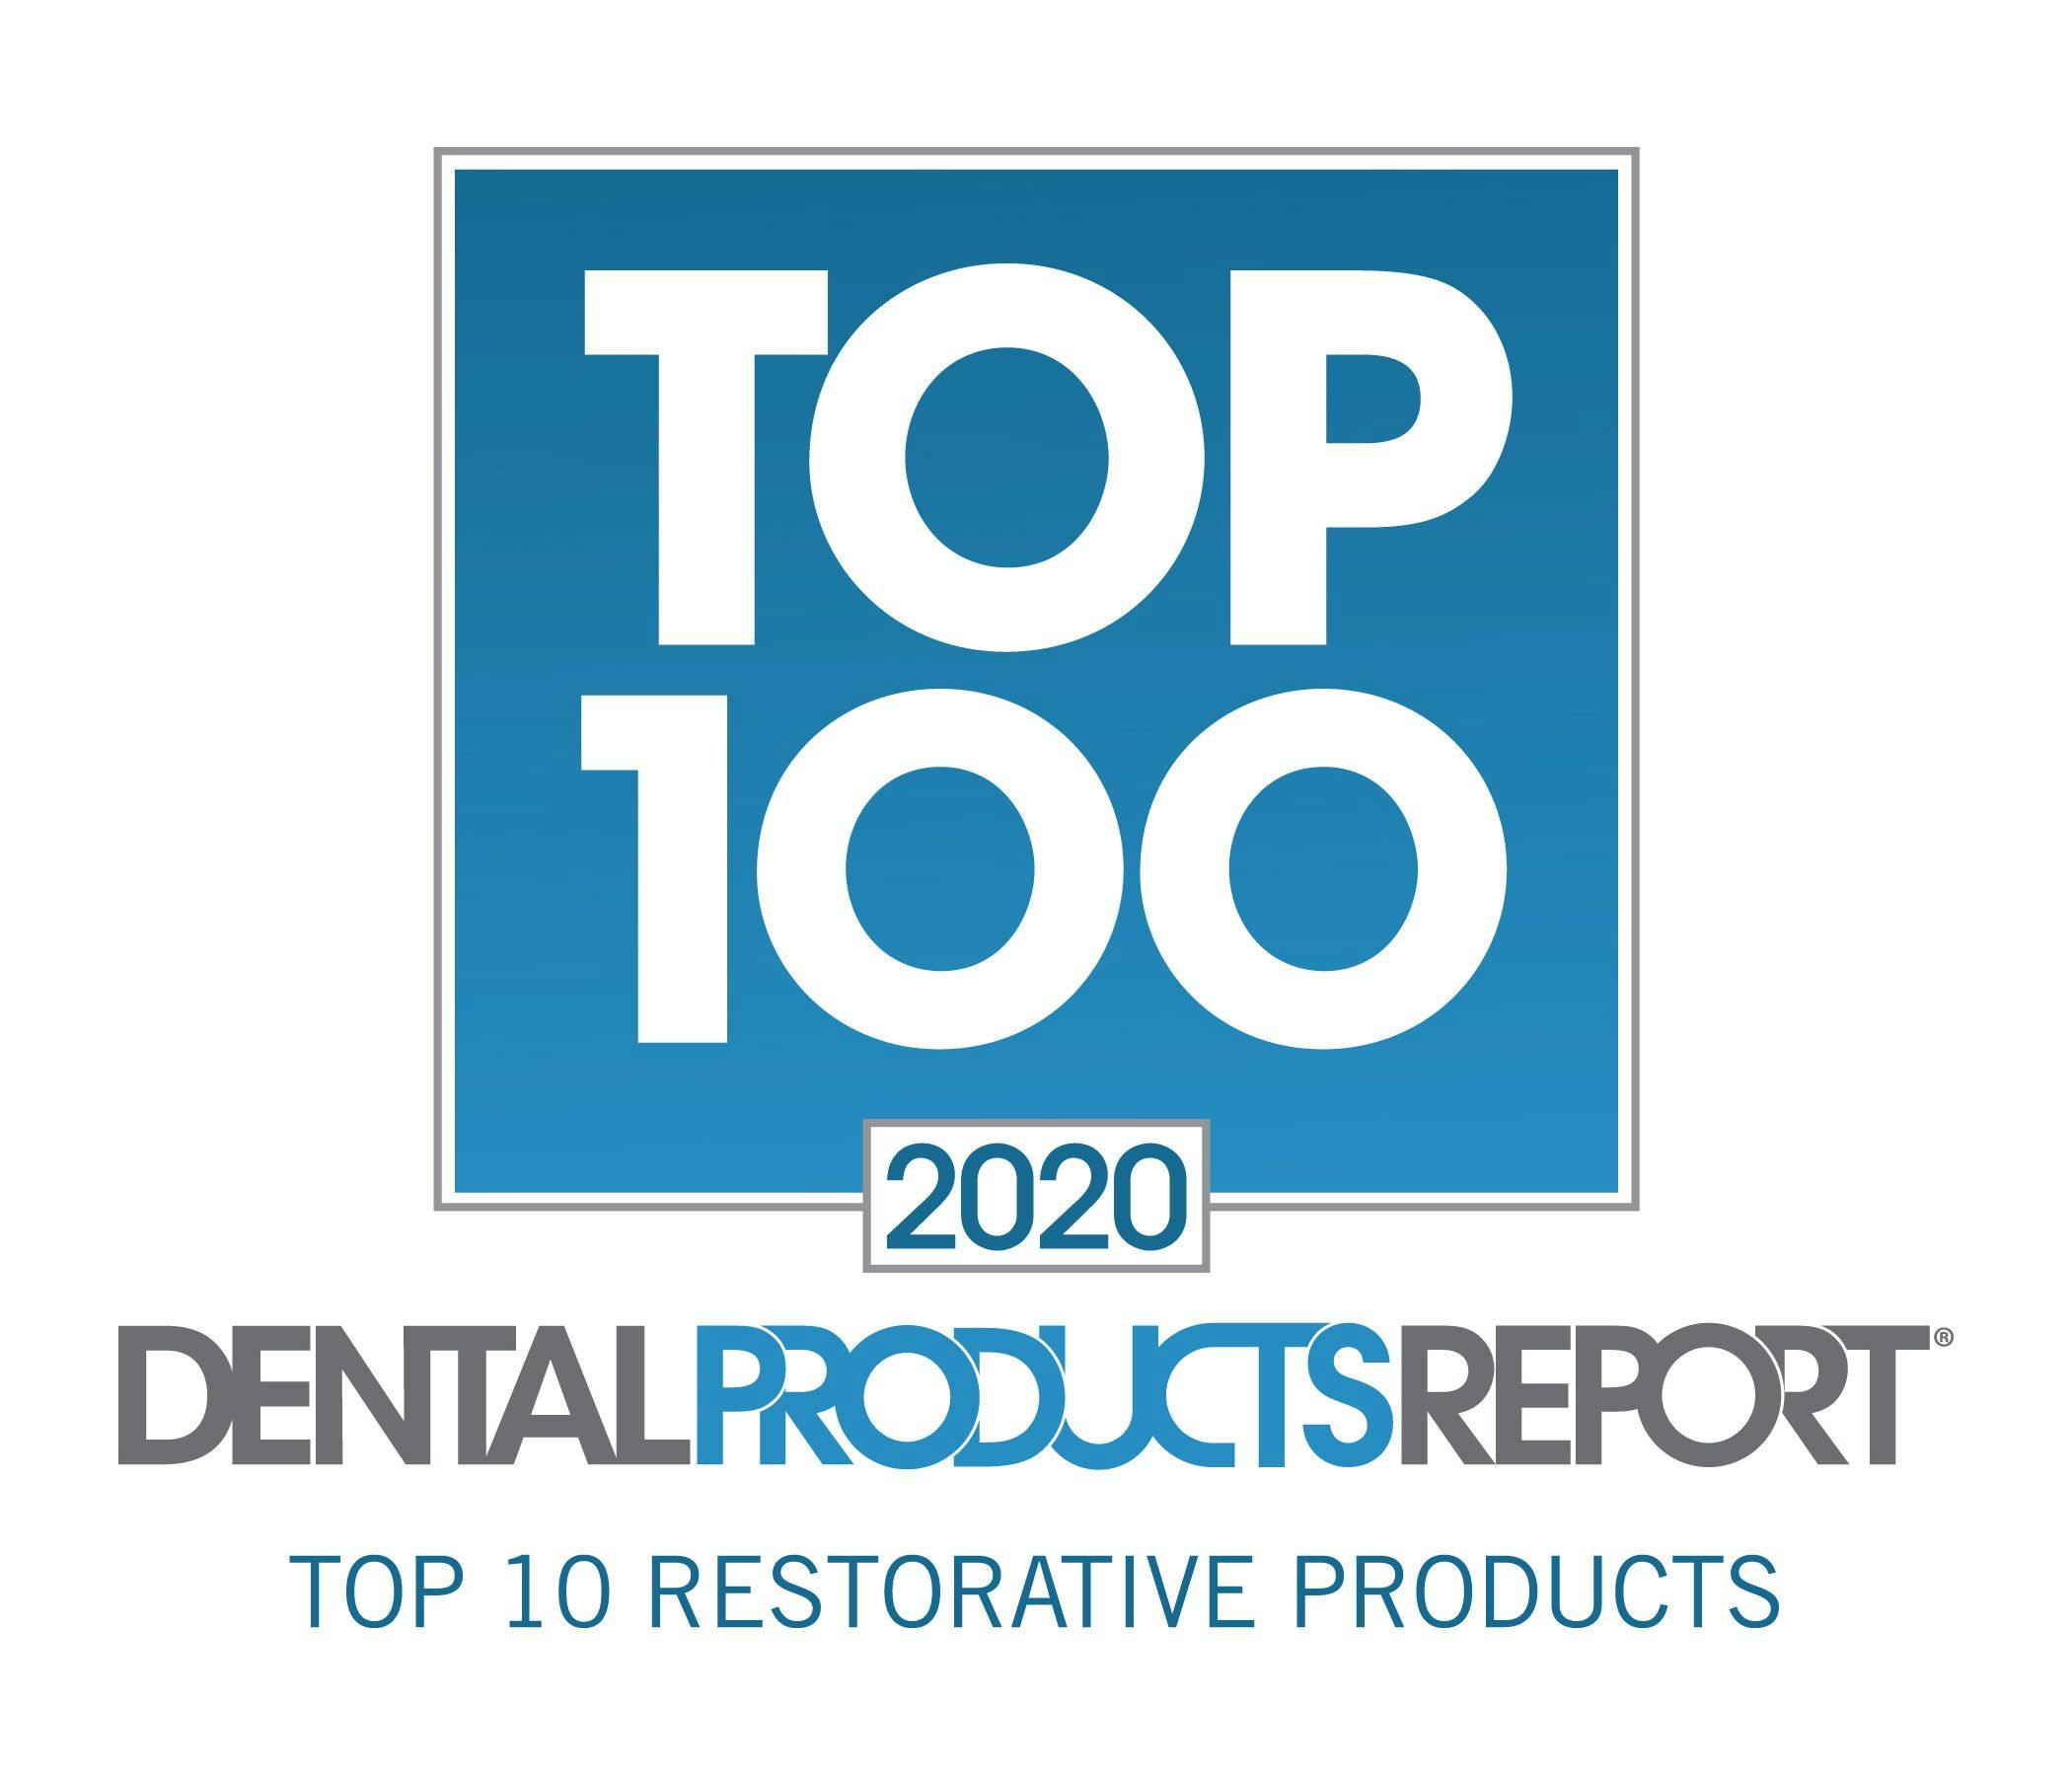 Top 10 Restorative Products of 2020